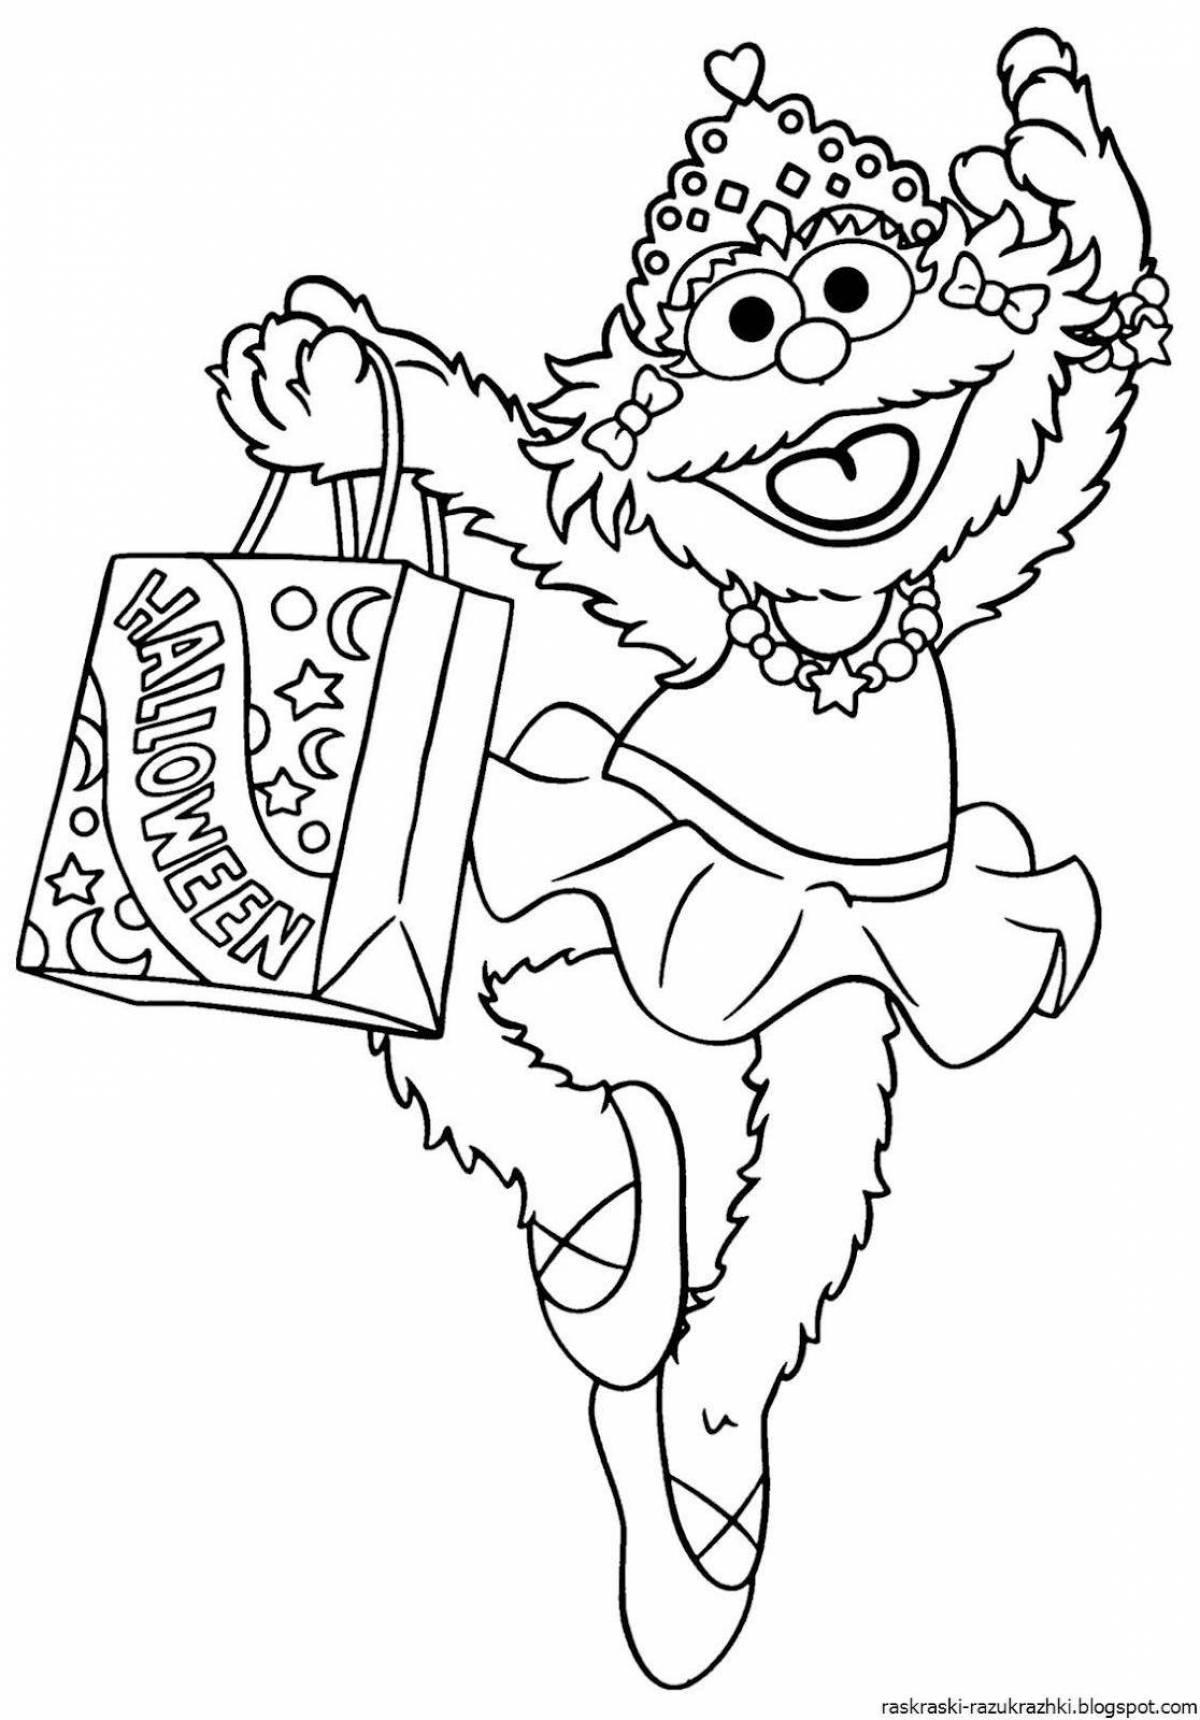 Fun coloring book funny for kids